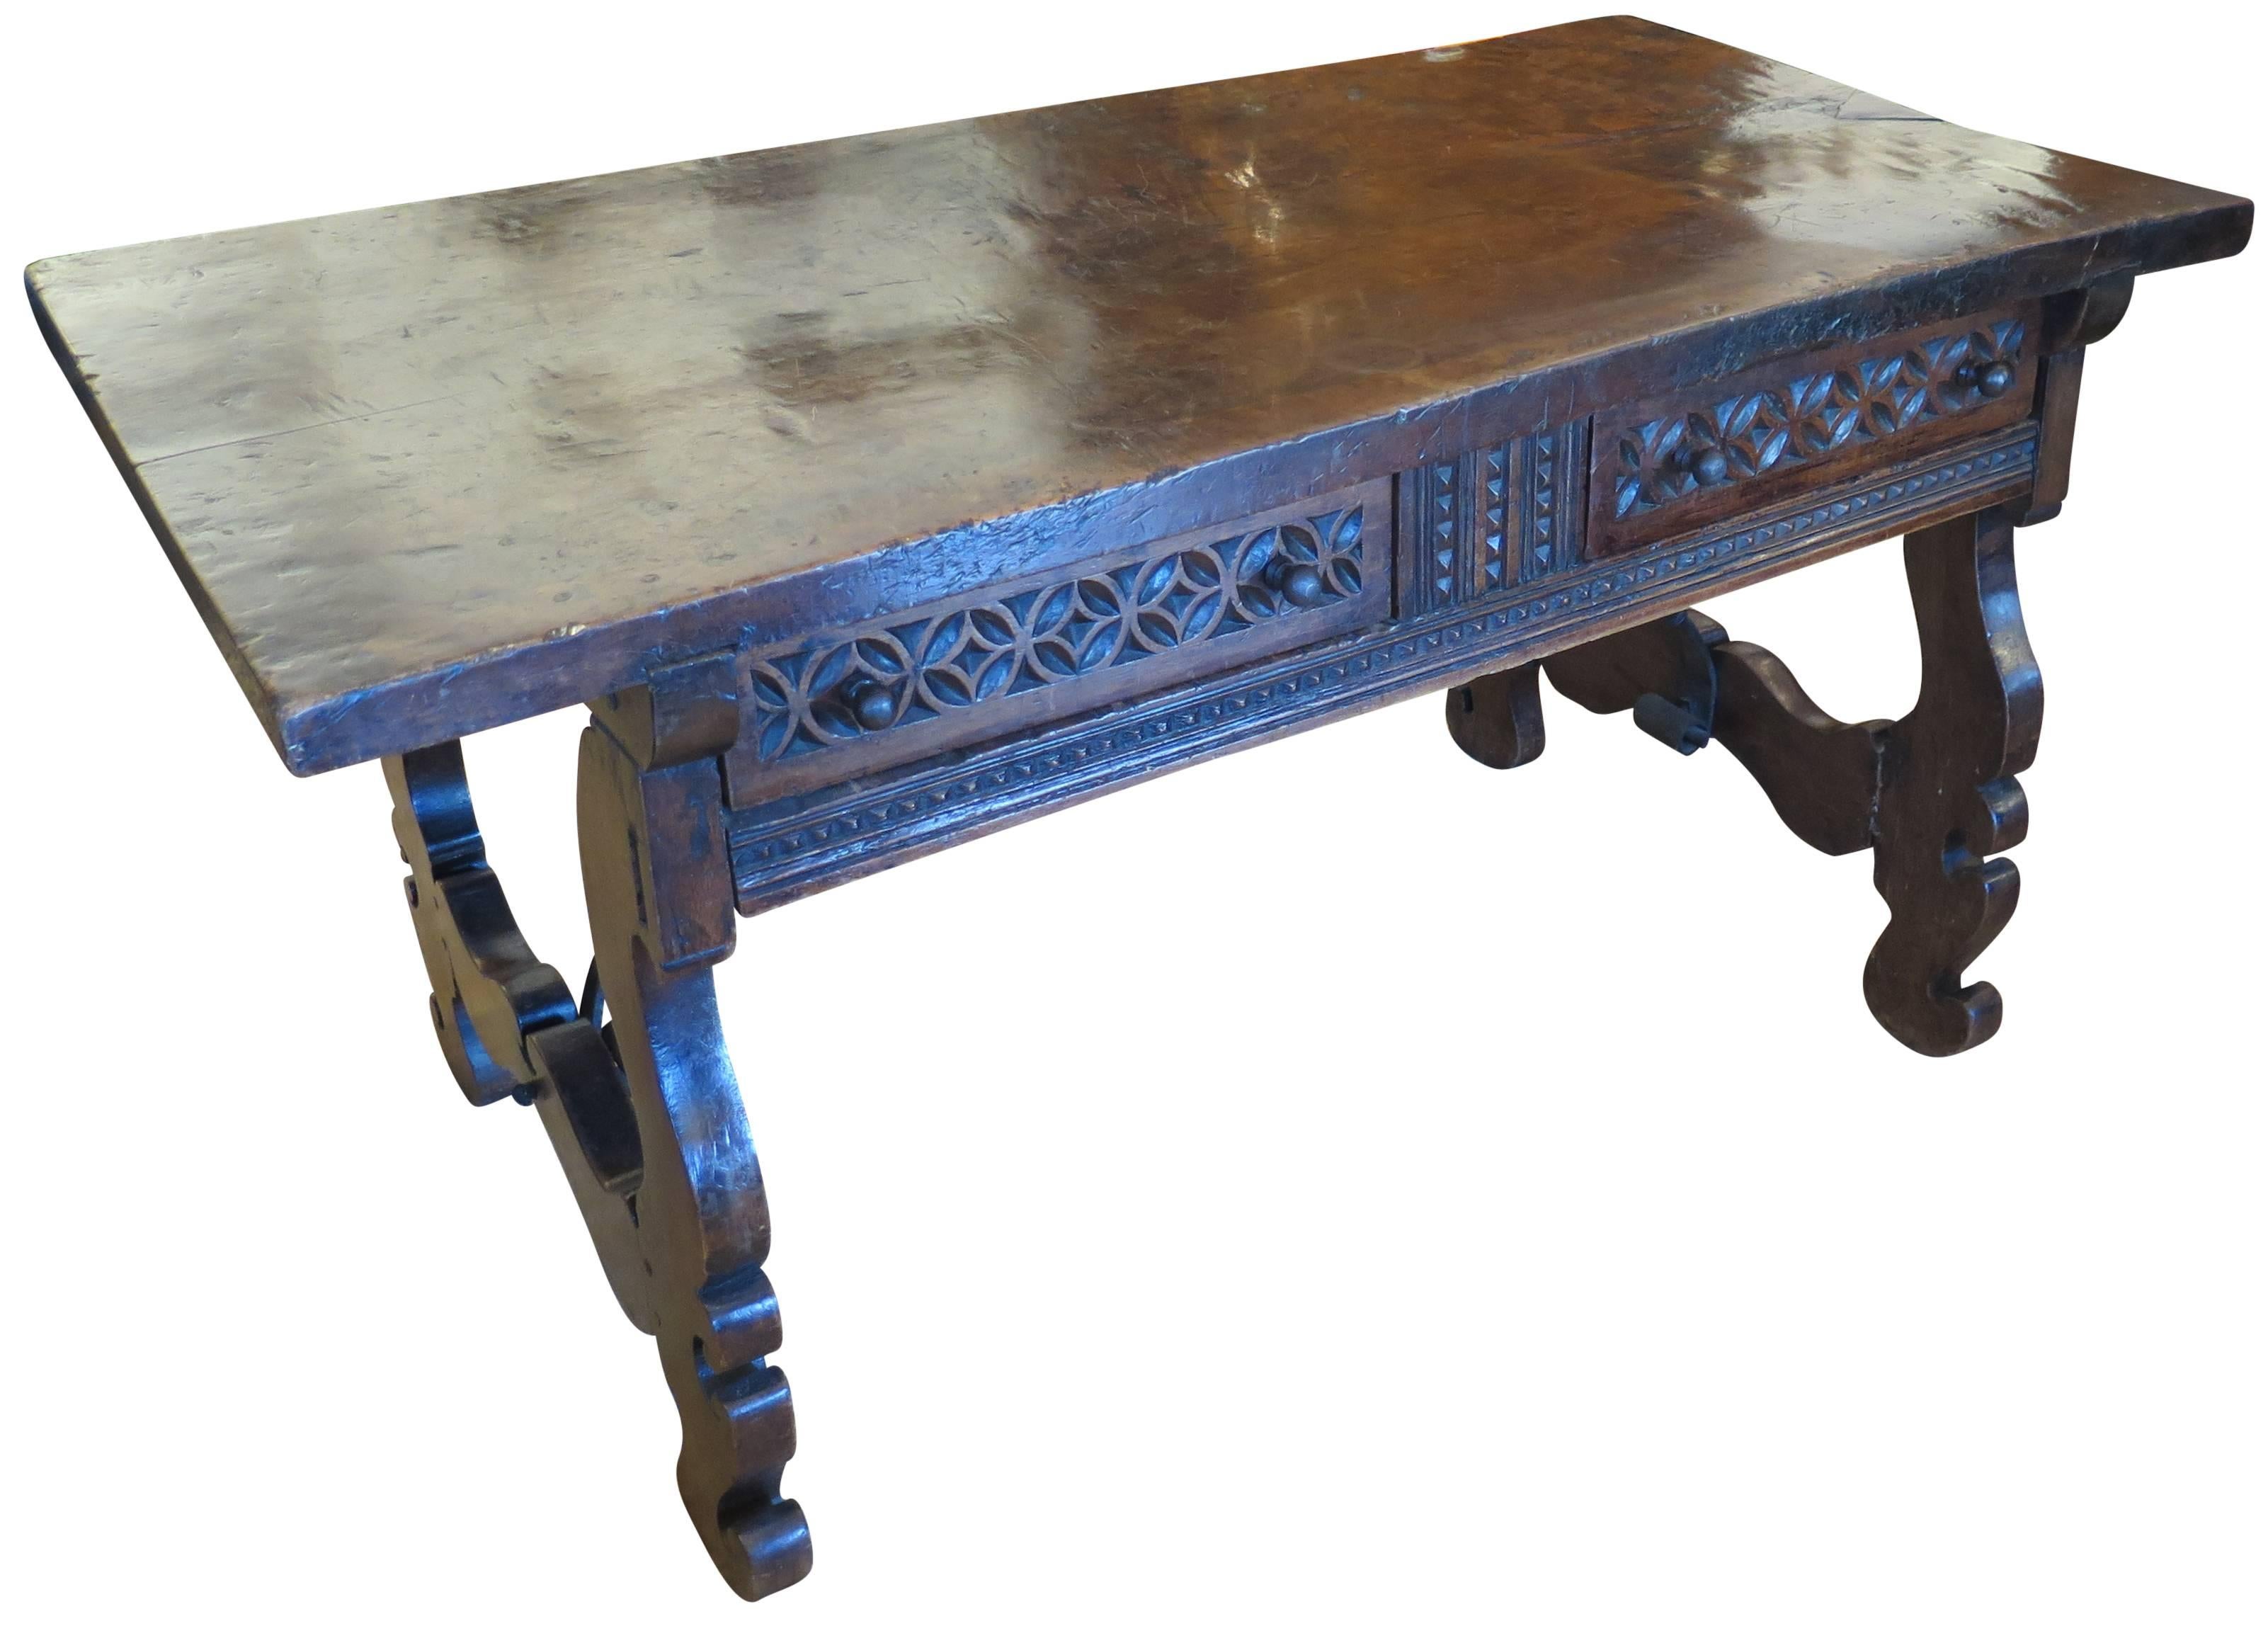 Fantastic walnut period table with fantastic walnut slab top. Moorish designs and elements on front doors. Iron stretcher and lyre leg base.